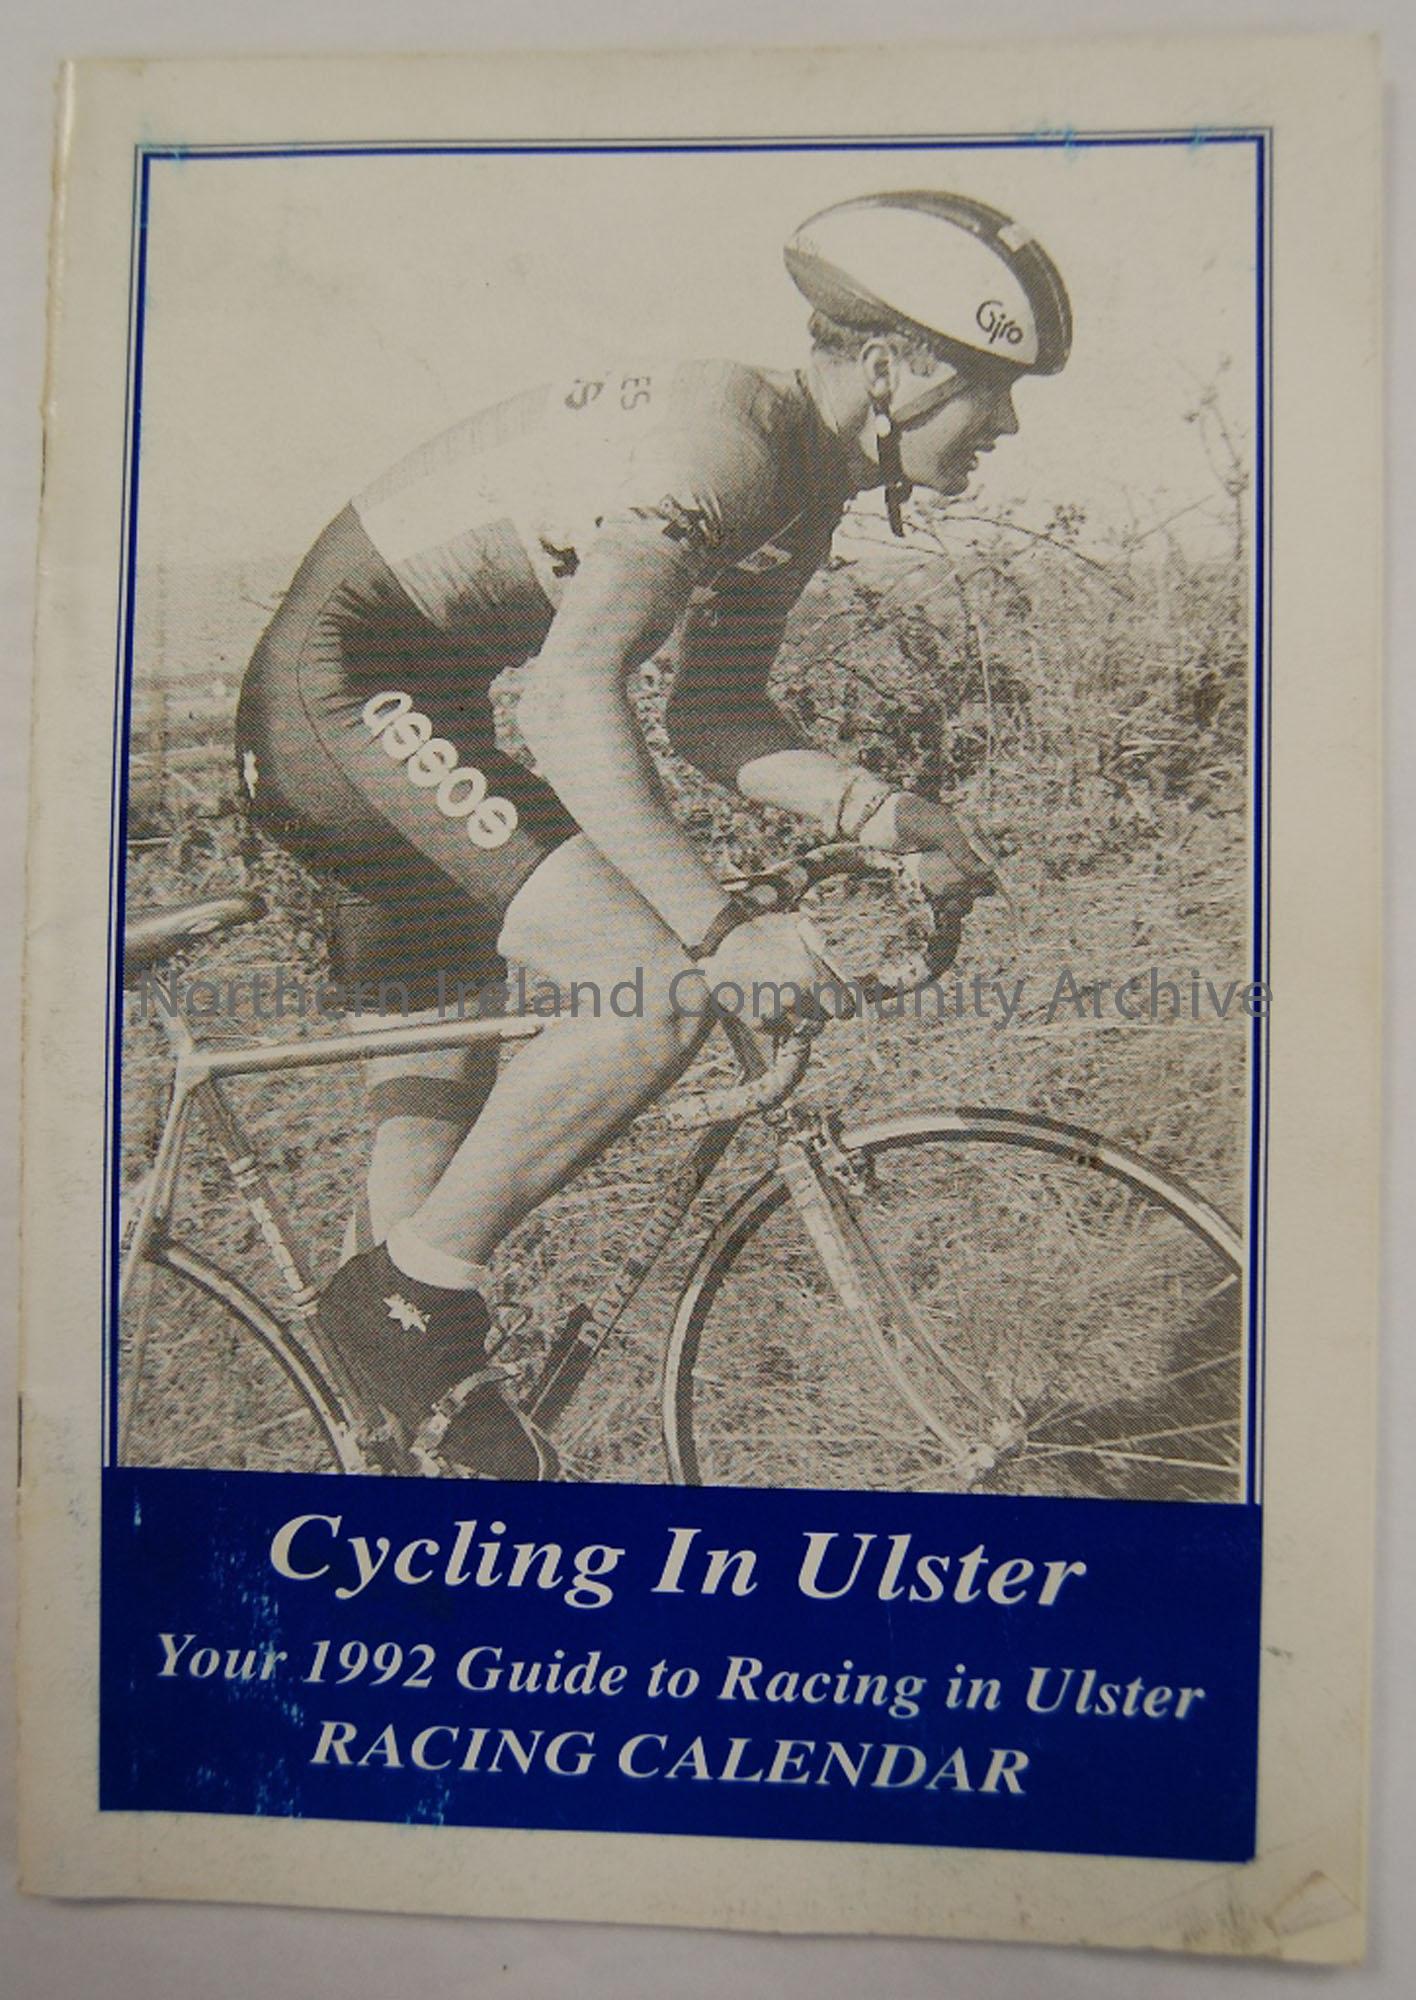 Cycling in Ulster. Your 1992 guide to racing in Ulster racing calendar (Ulster Cycling Federation)